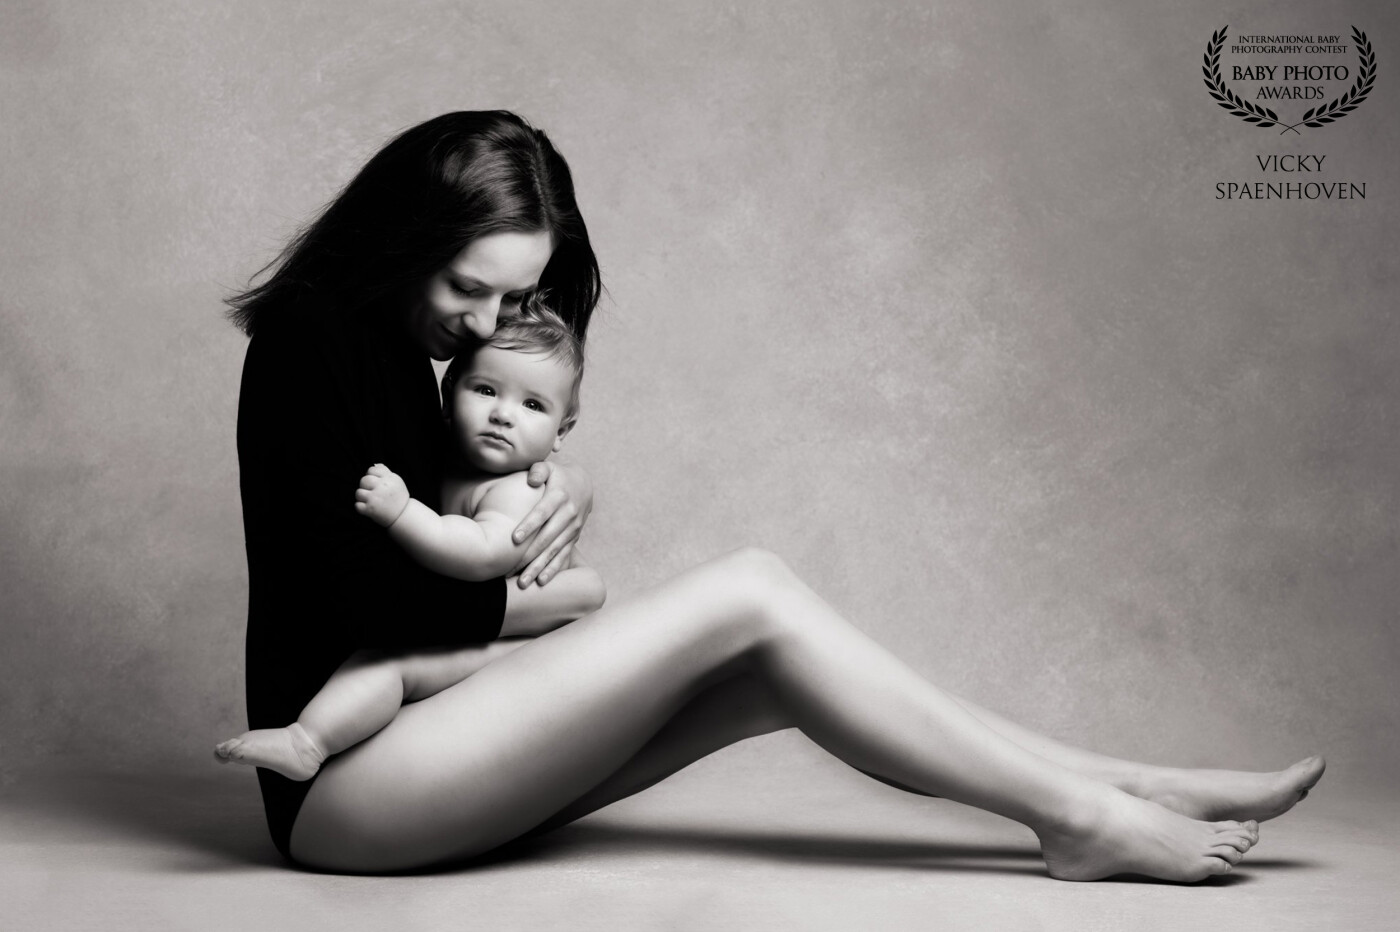 Mom Hanne with her baby boy Casper. I just love these tender poses and they look spectacular in black and white.